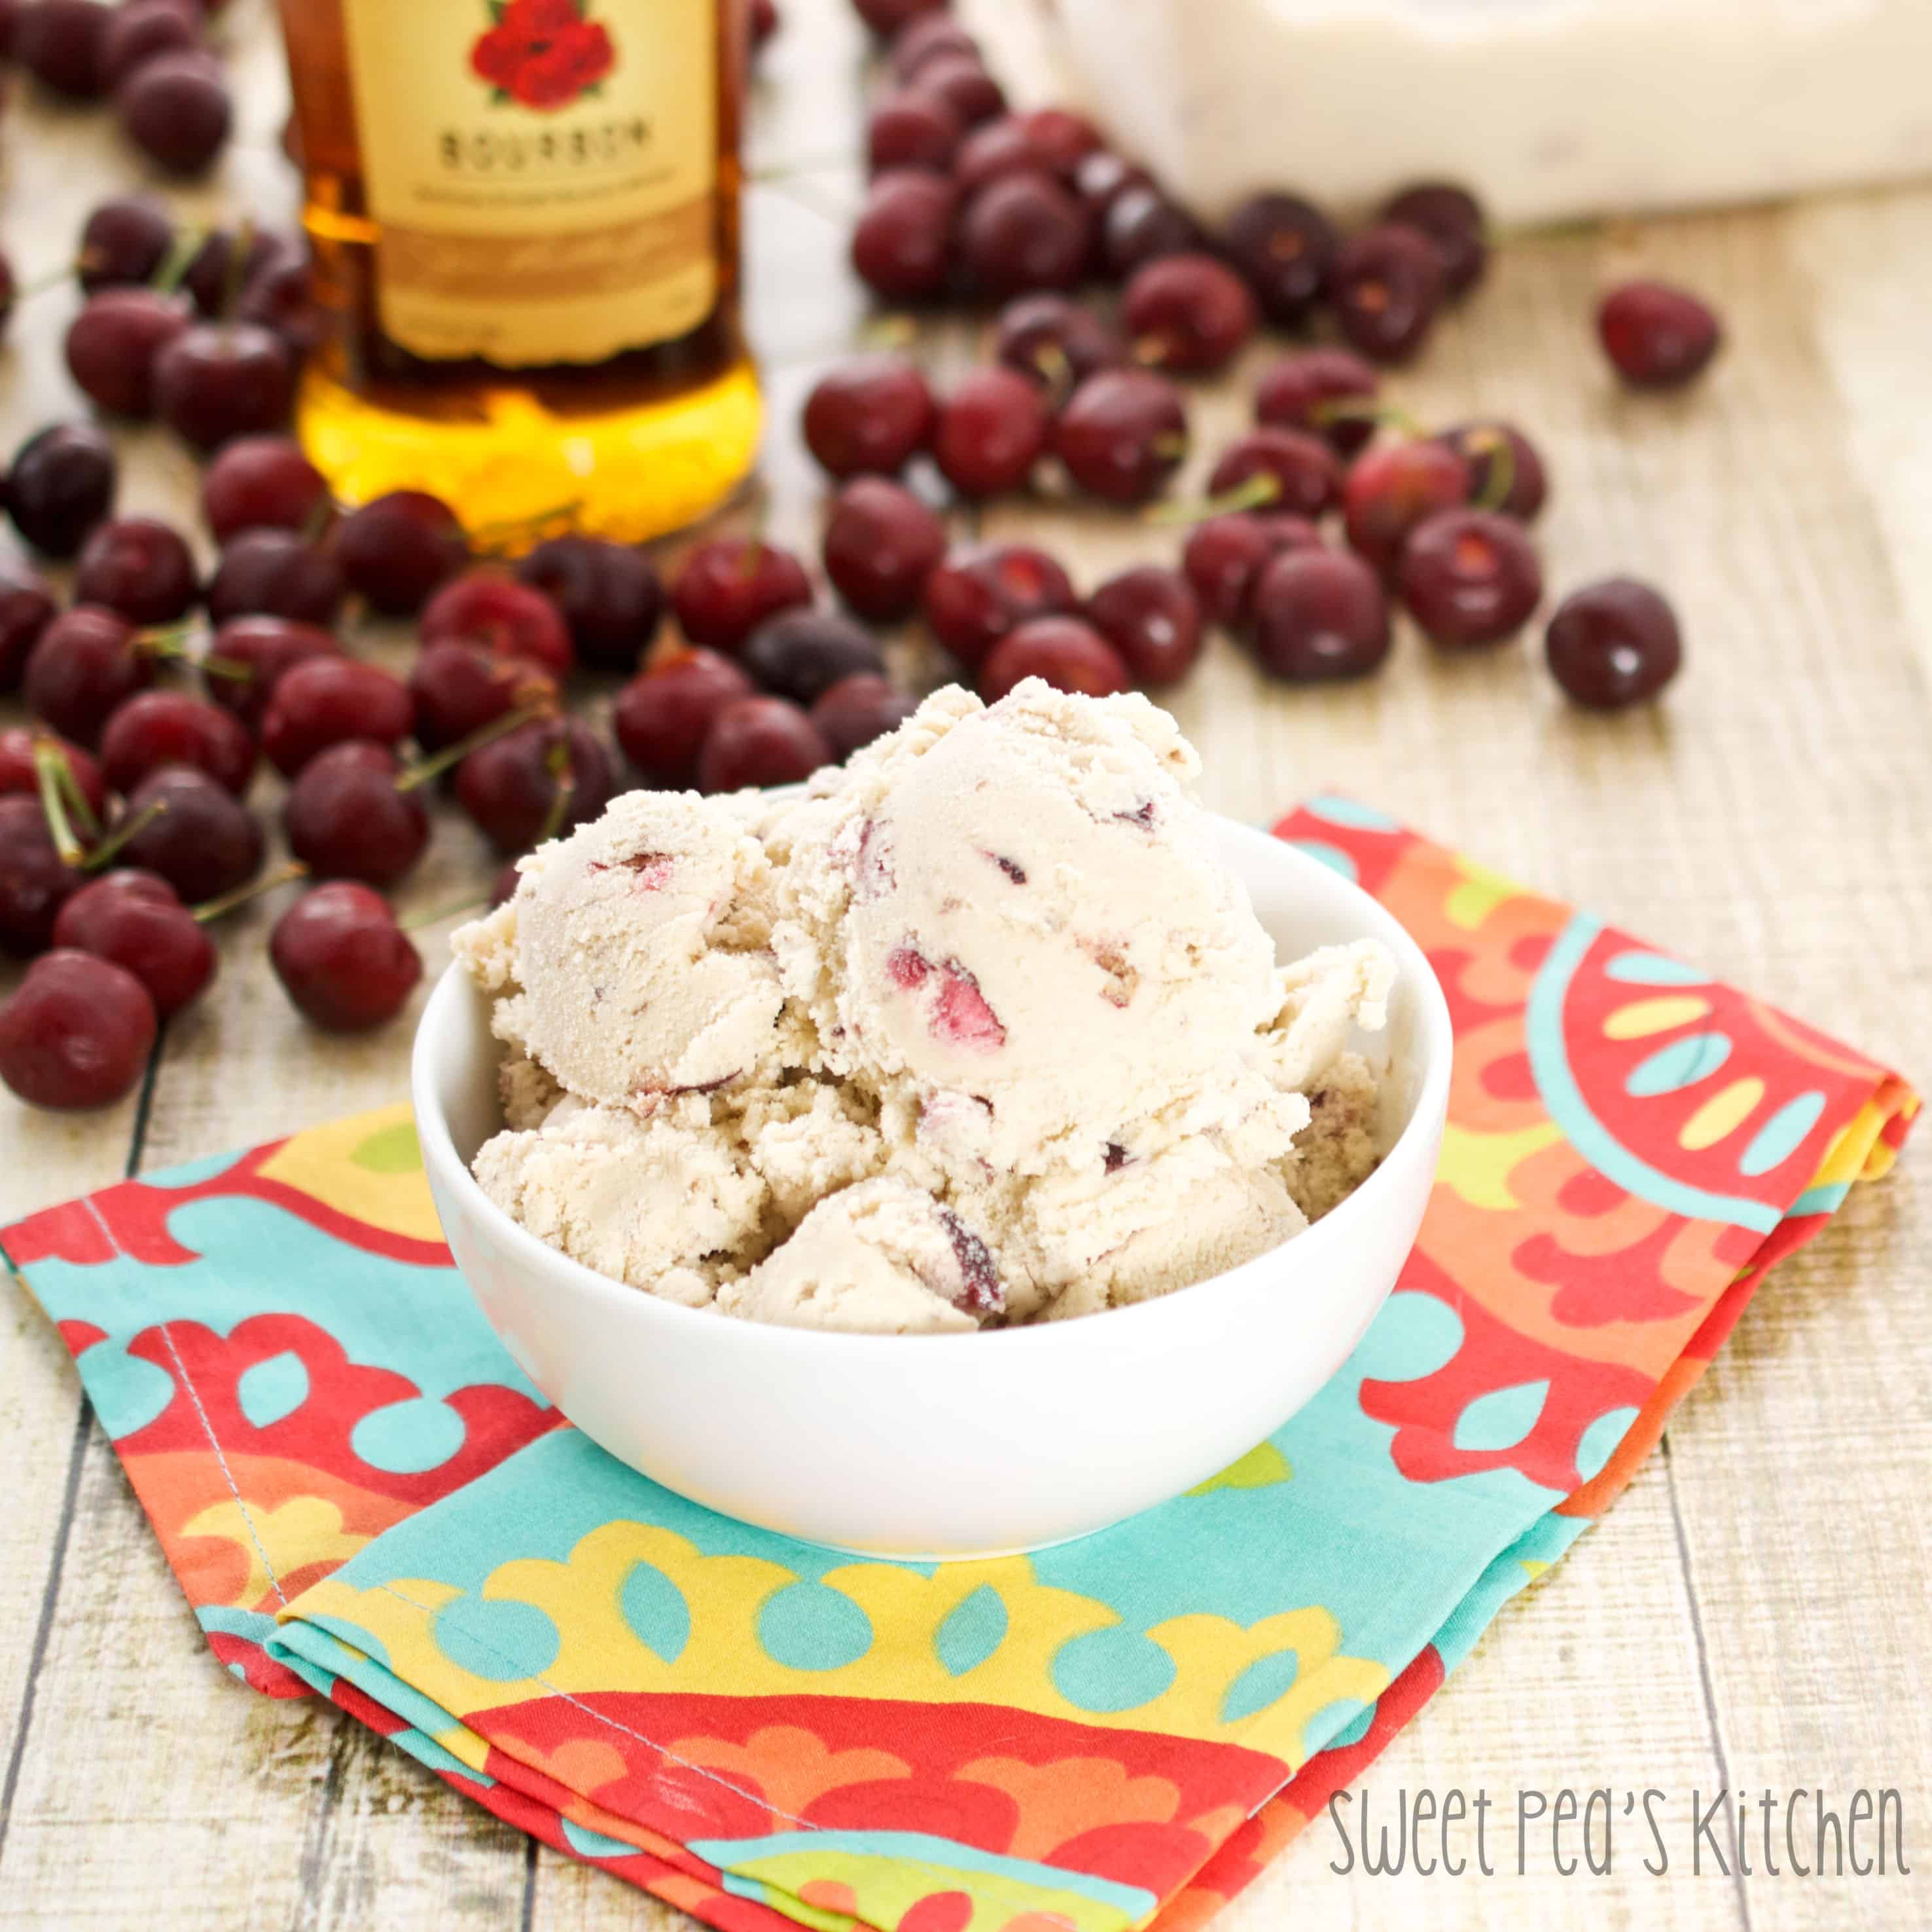 A bowl of cherry ice cream with bourbon accents sitting on a wooden table with vibrant colored napkin under bowl